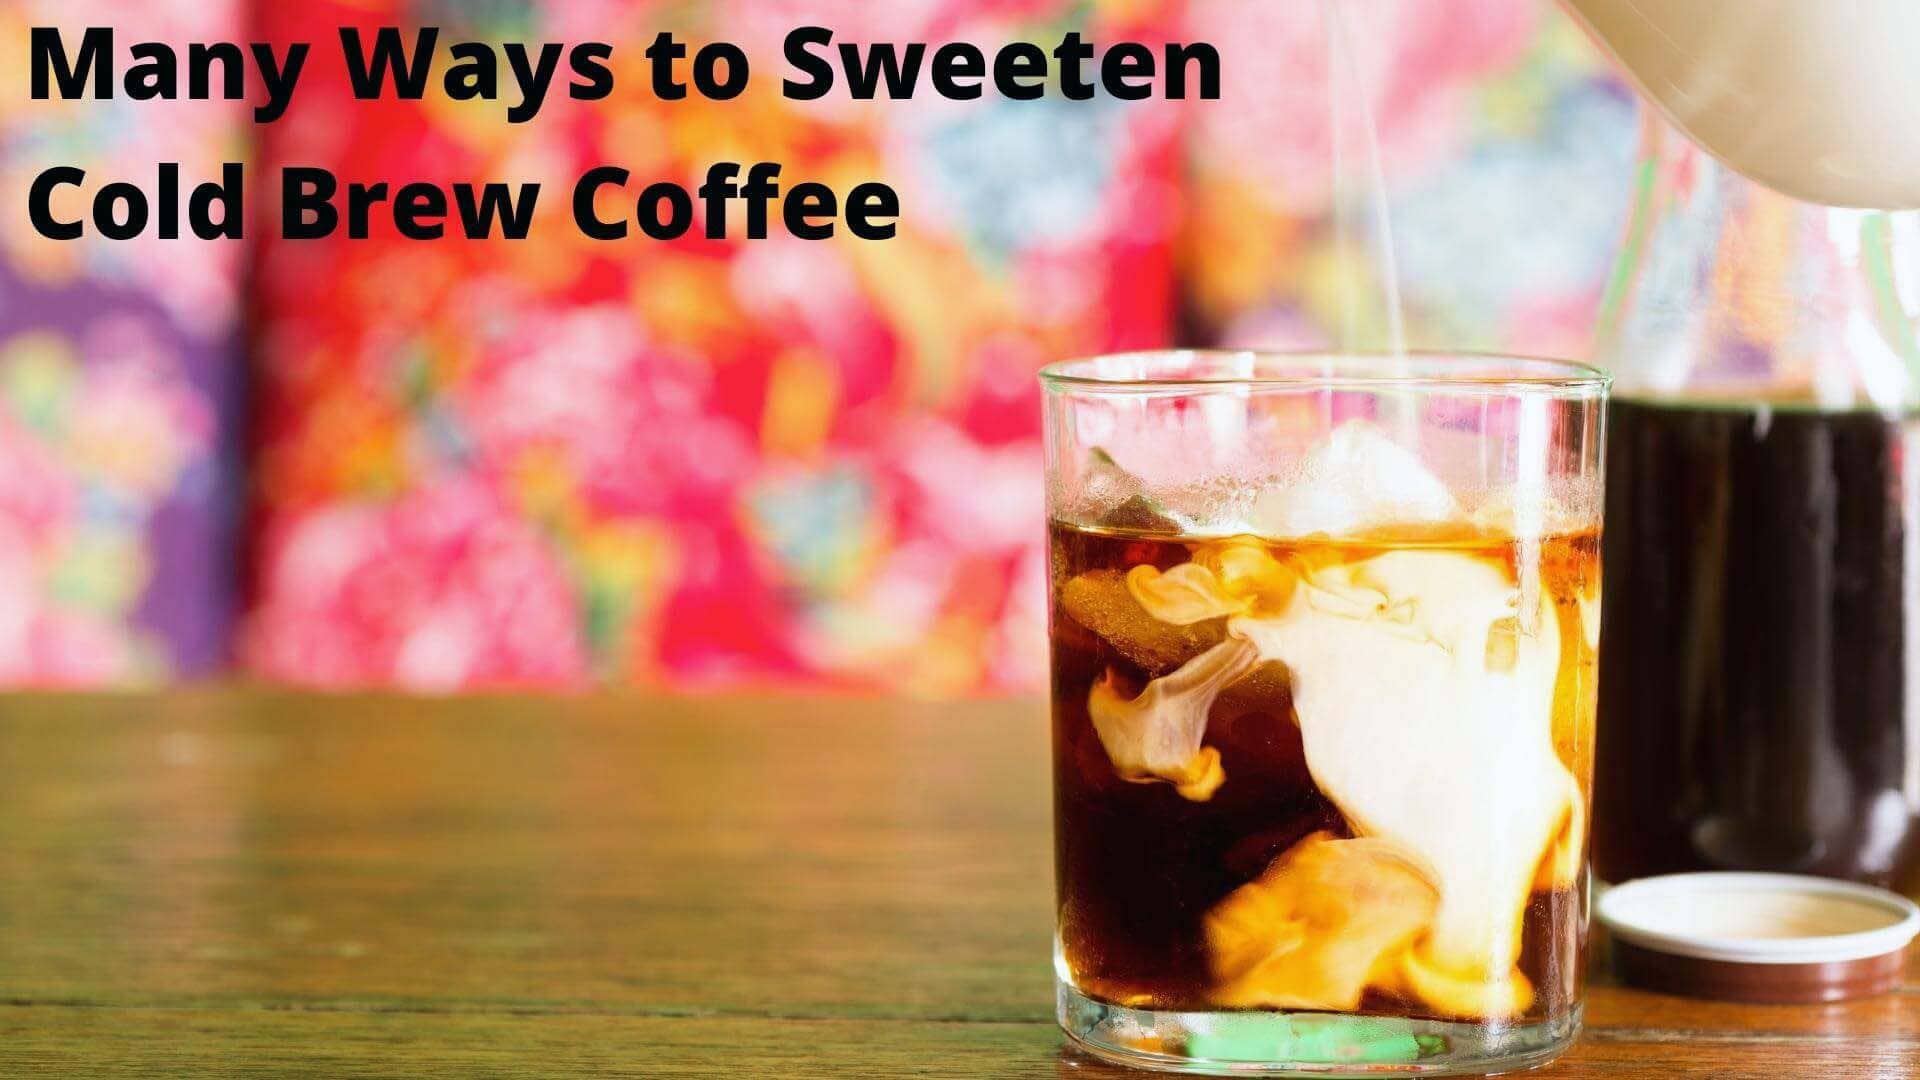 How to sweeten cold brew coffee